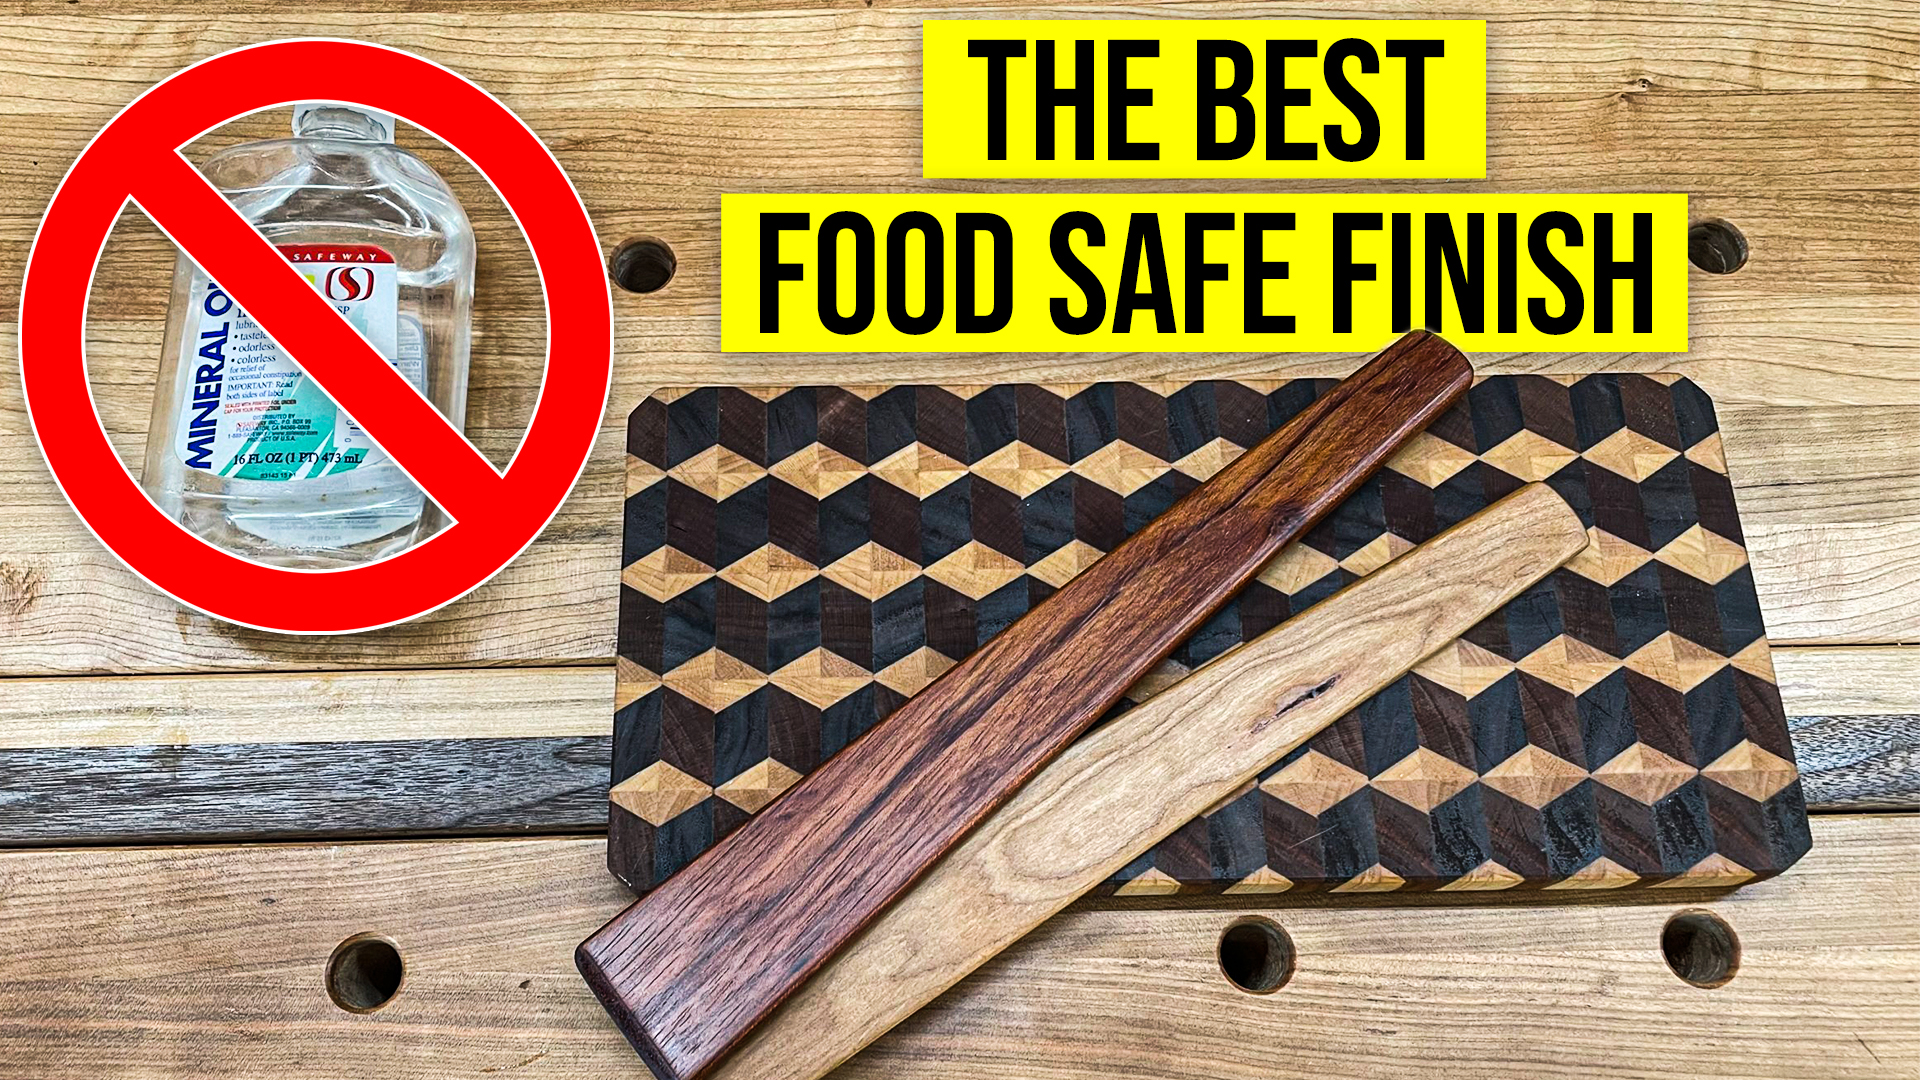 Food-Safe Finishes - The Home Depot